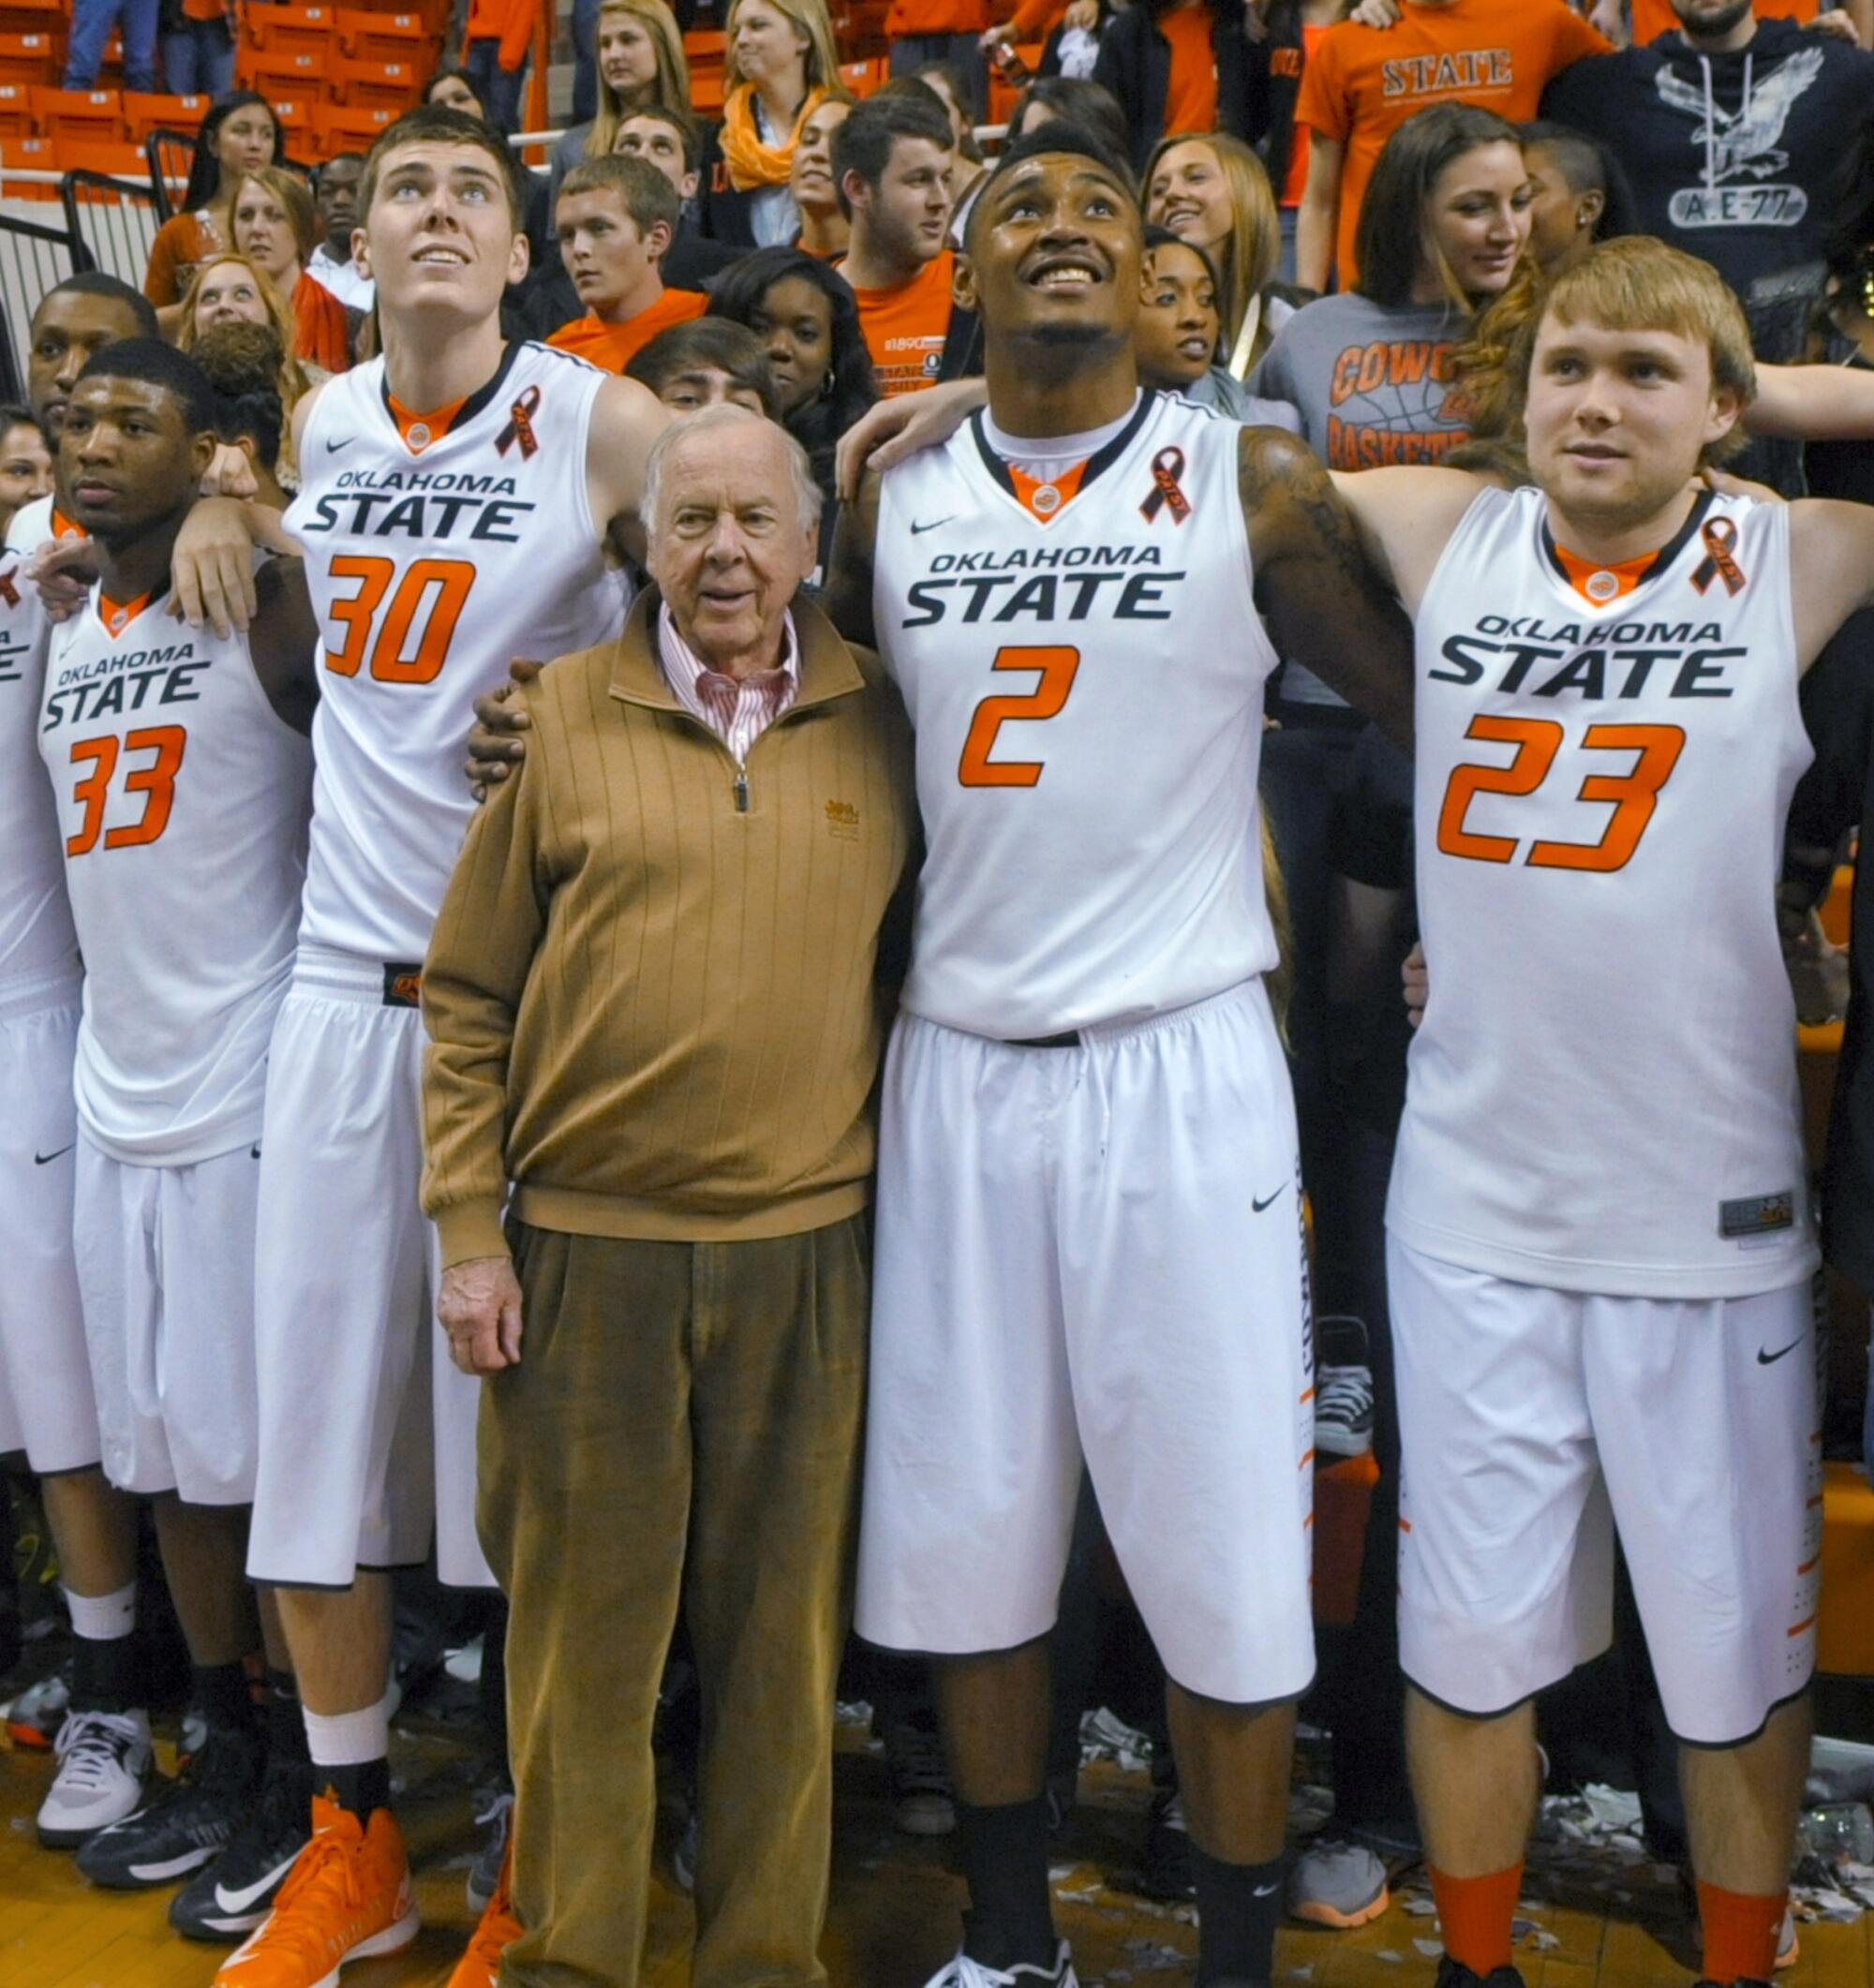 Oklahoma State supporter T. Boone Pickens celebrates with Marcus Smart, Mason Cox, Le'Bryan Nash and Alex Budke